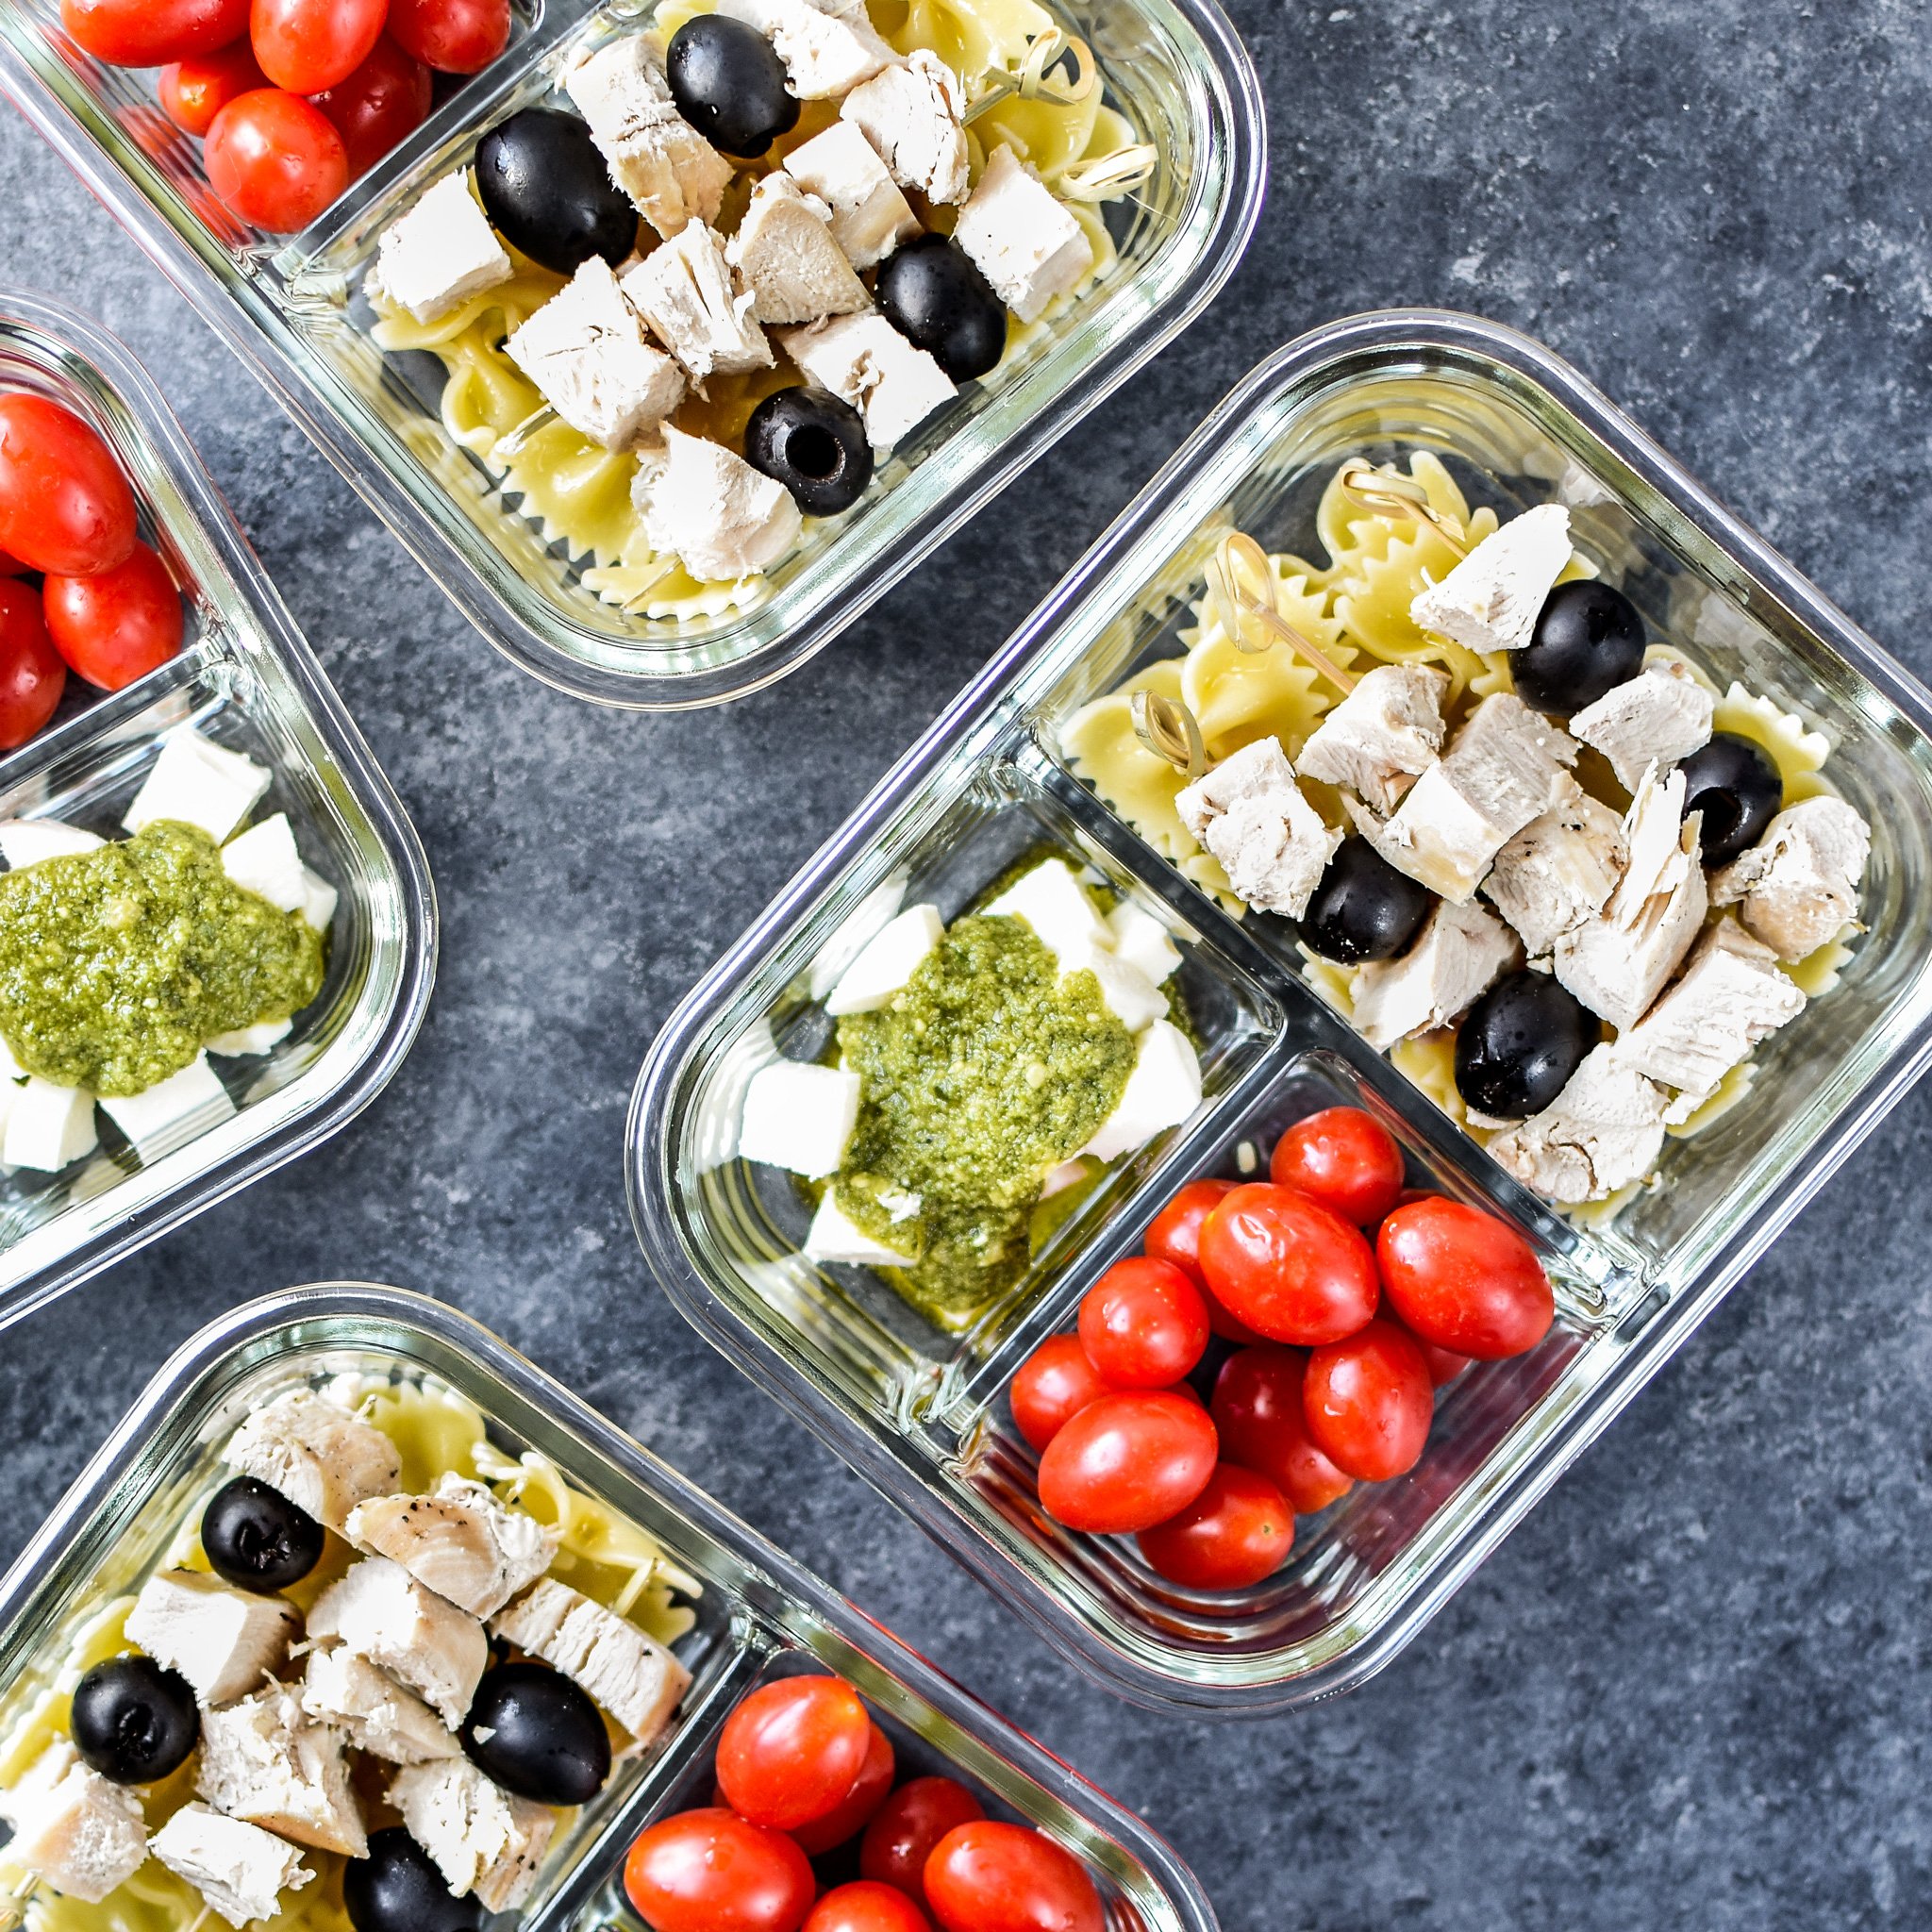 A view of the DIY Chicken Pesto Pasta Skewers Meal Prep from above, including grape tomatoes, fresh mozzarella and traditional pesto!